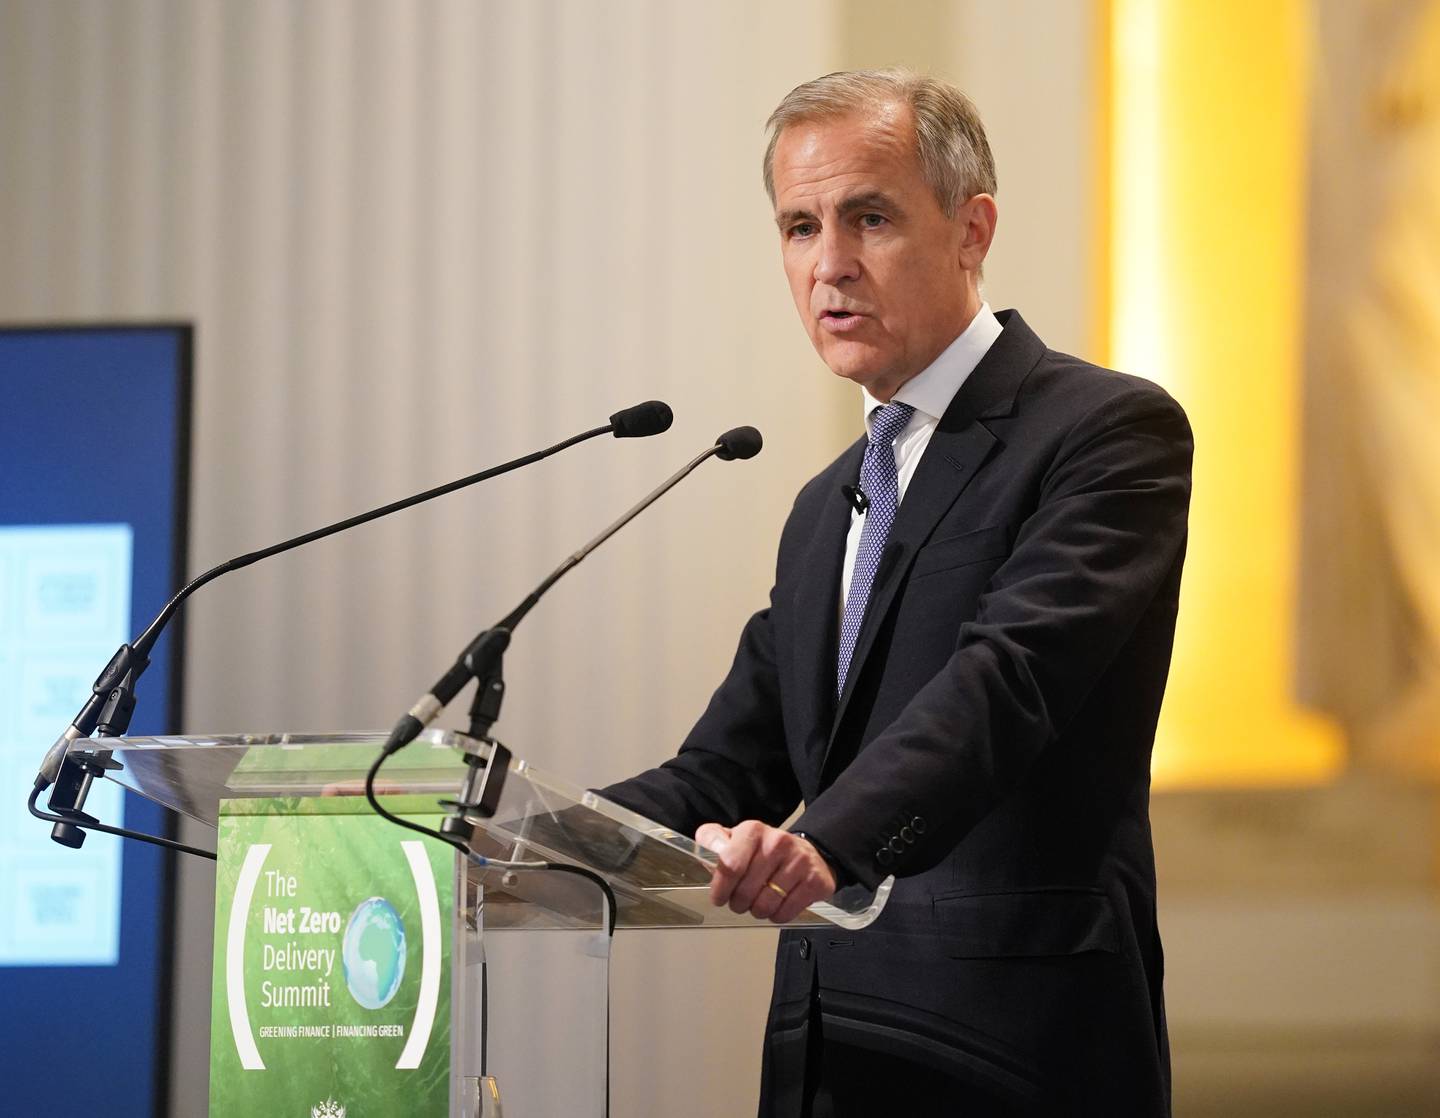 Mark Carney, UN special envoy on climate action and finance, speaks at the Net Zero Delivery Summit at the Mansion House, London.